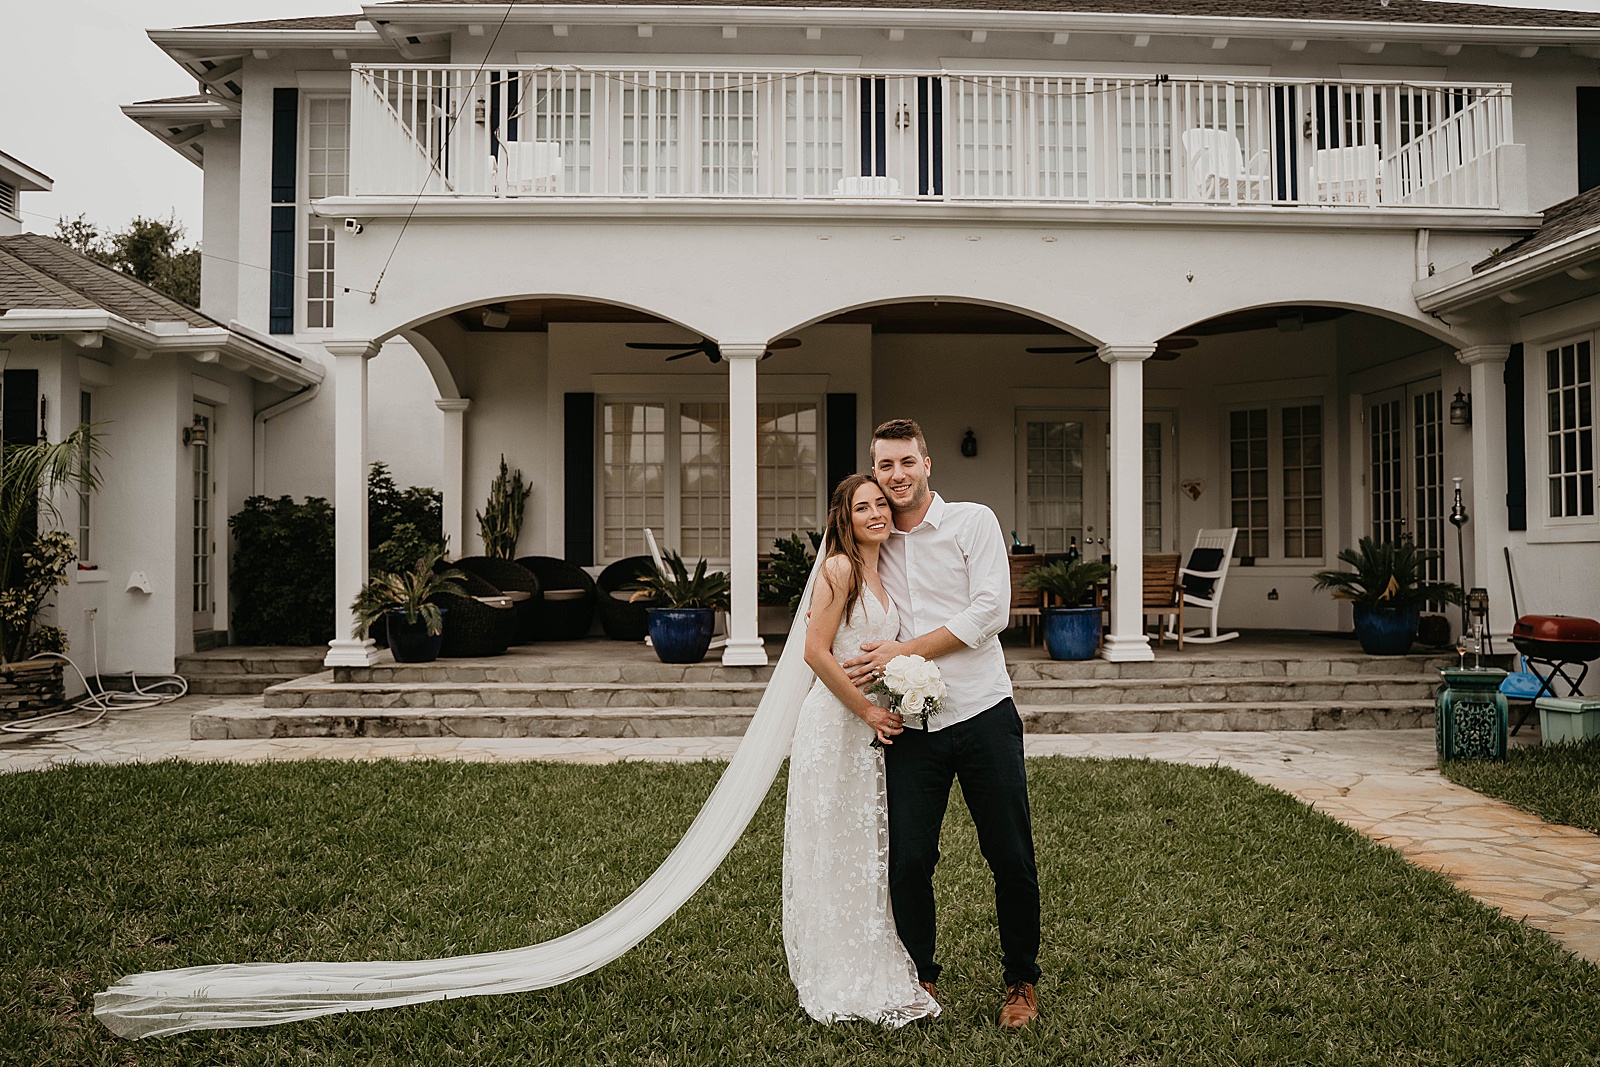 Intimate Fort Lauderdale Elopement Bride and Groom Portrait captured by South Florida Elopement Photographer, Krystal Capone Photography